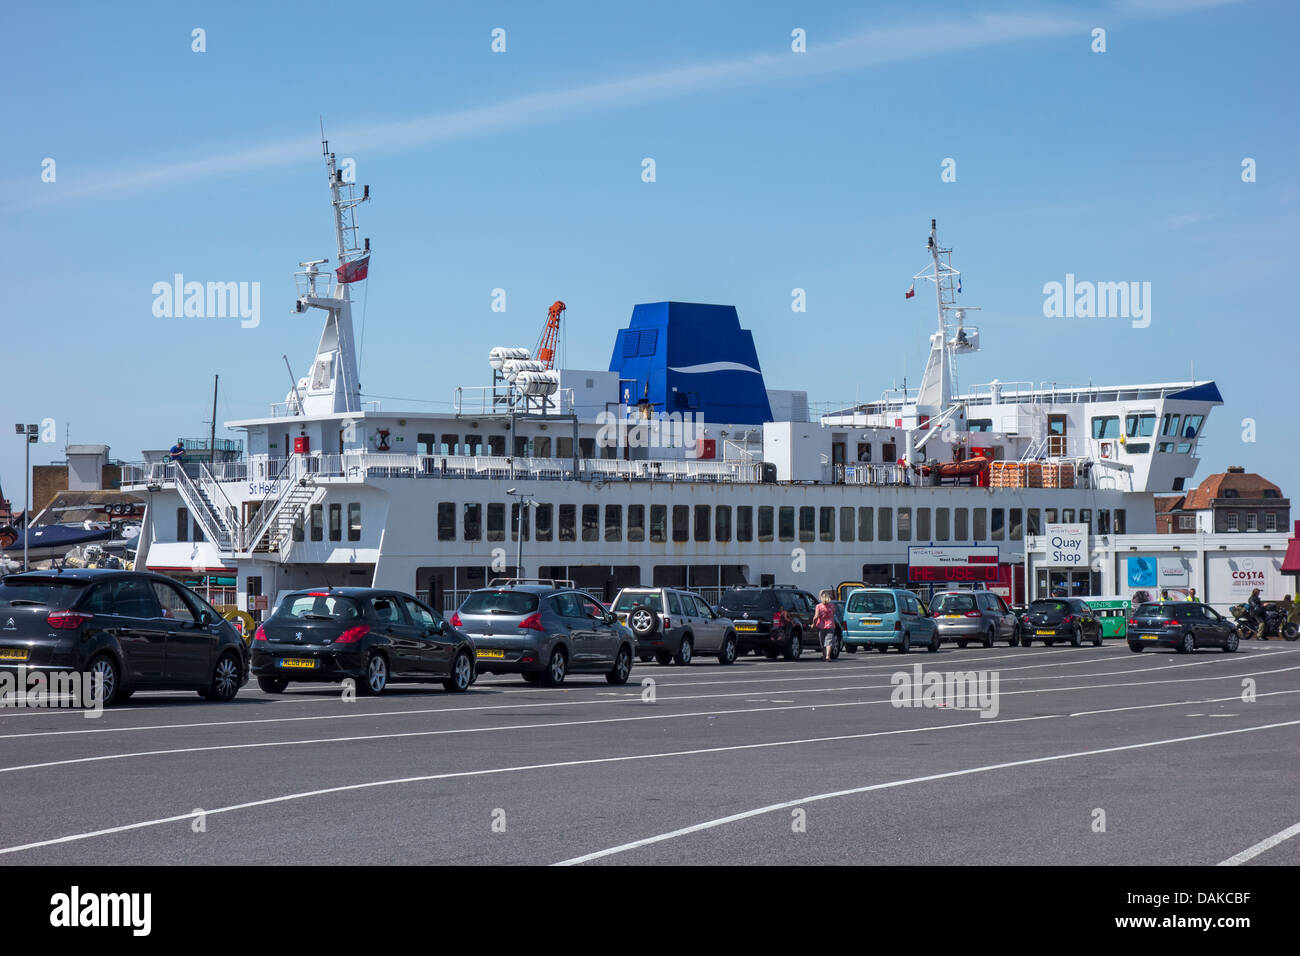 WightLink Isle of Wight Ferry Ferries Portsmouth Stock Photo